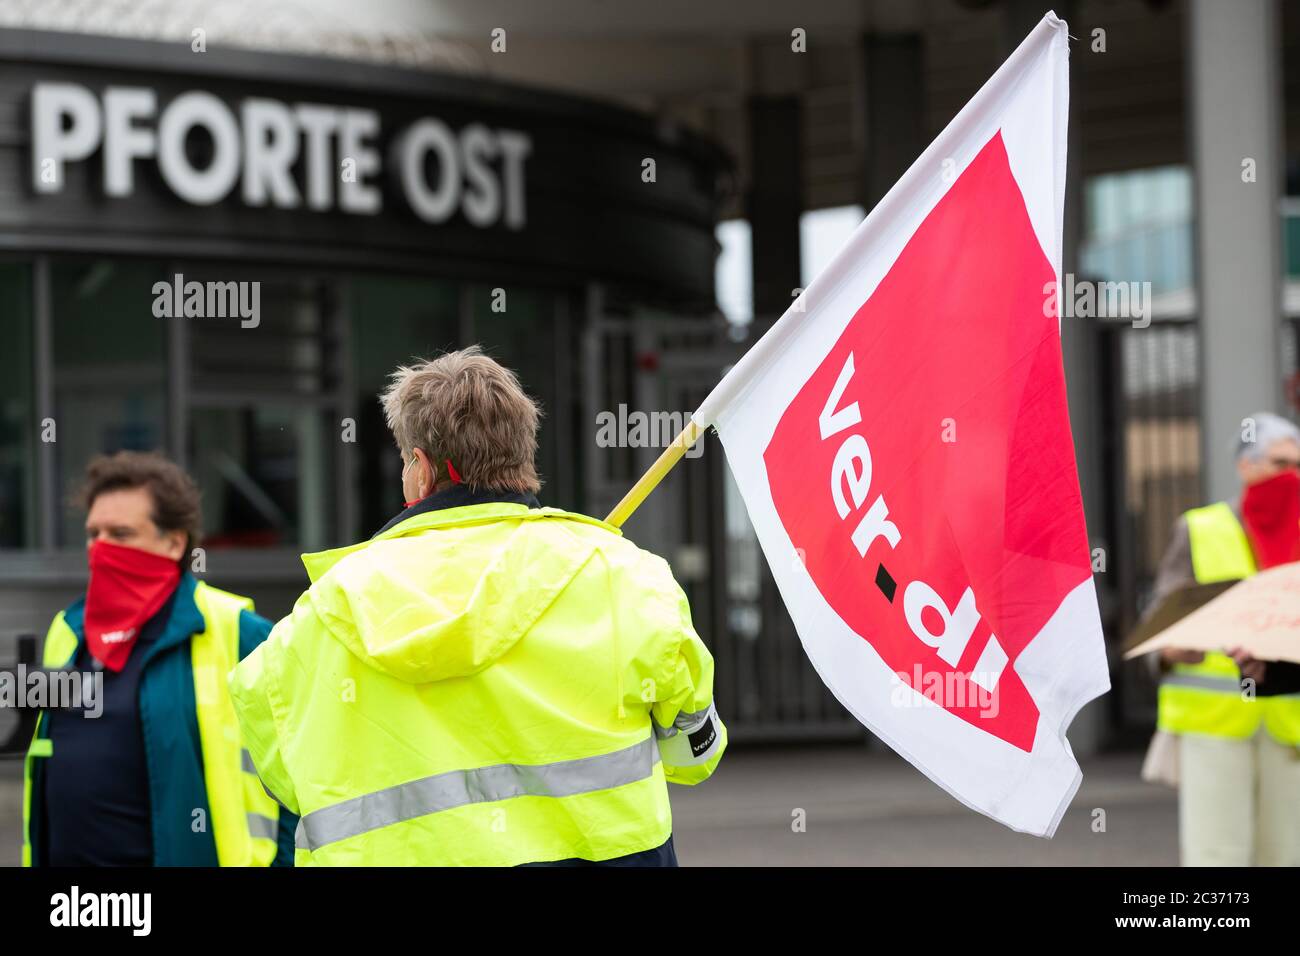 Stuttgart, Germany. 19th June, 2020. A demonstrator stands with a Ver.di flag in front of the East Gate at Stuttgart Airport. The services union Verdi is calling for protest events at many German airports and airline locations. Among other things, it is about the conclusion of a collective agreement between Verdi and the employers' association of ground handling service providers ABL to increase short-time work due to the Corona pandemic. Credit: Tom Weller/dpa/Alamy Live News Stock Photo